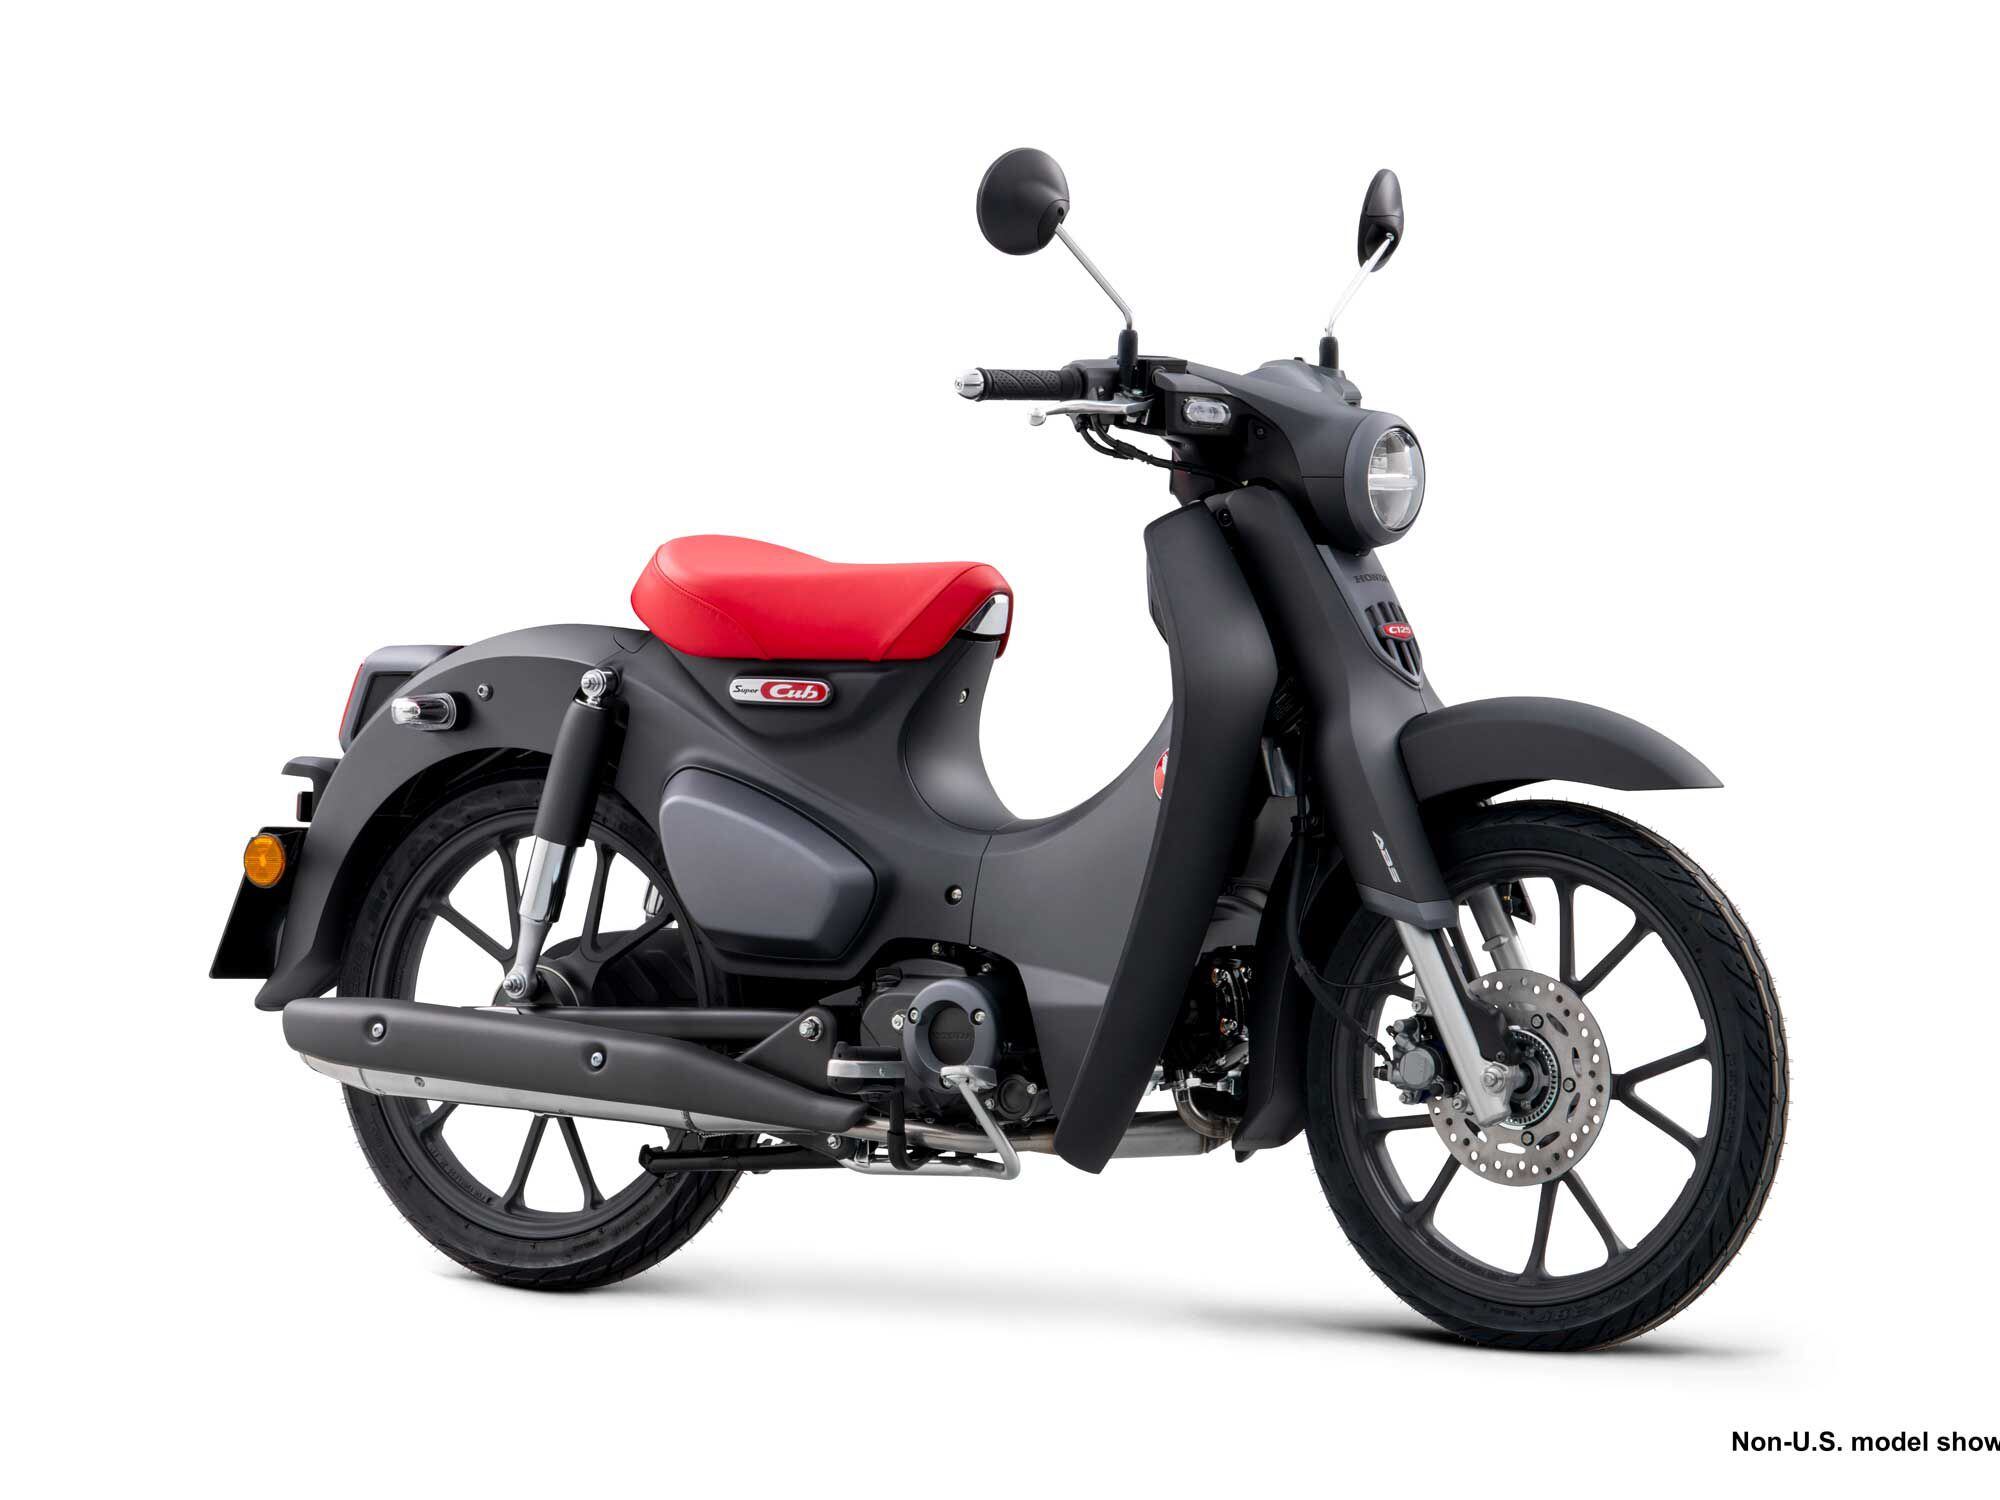 Calling all lone wolves: attractive gray matte color complements the single, red solo seat.